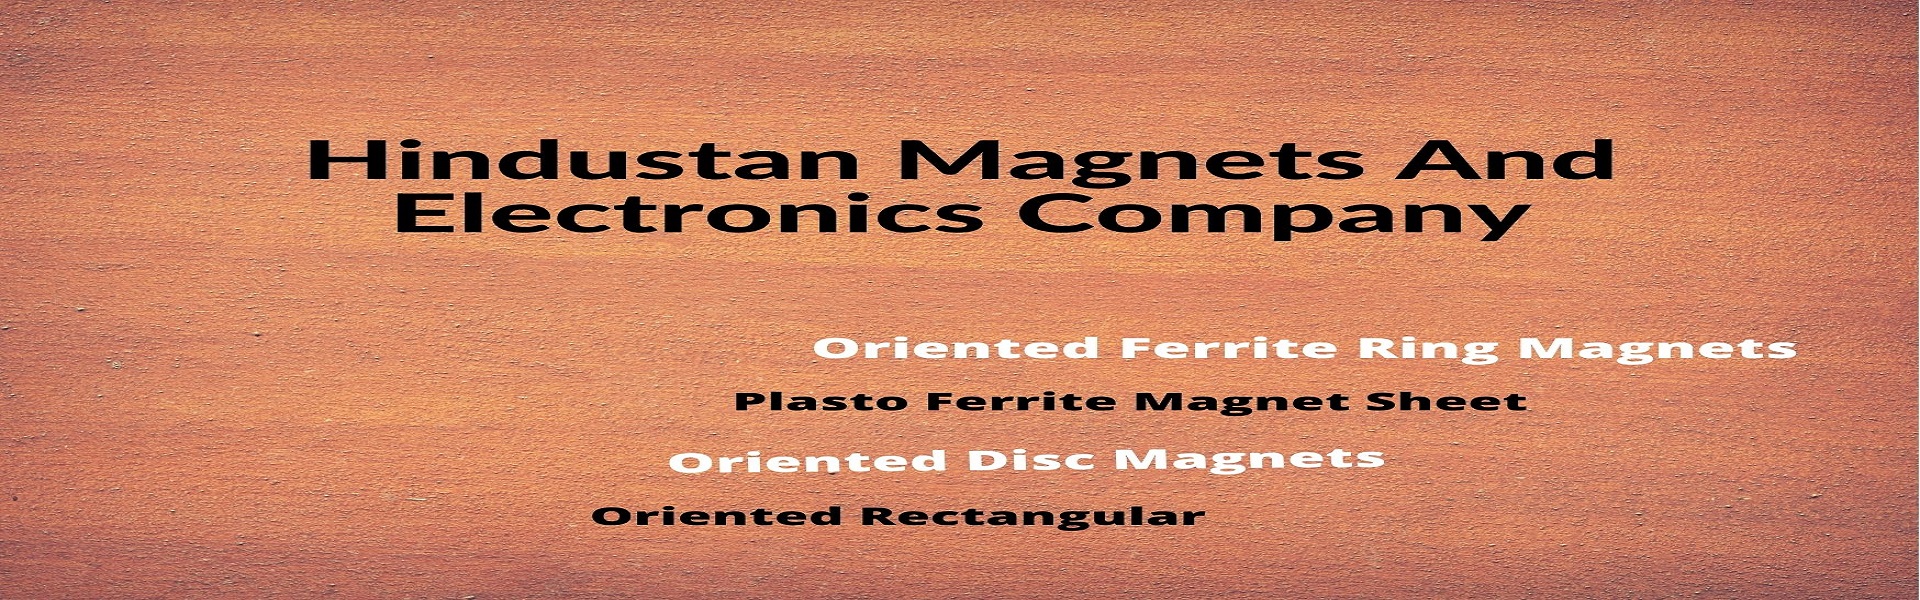 Hindustan Magnets And Electronics Company